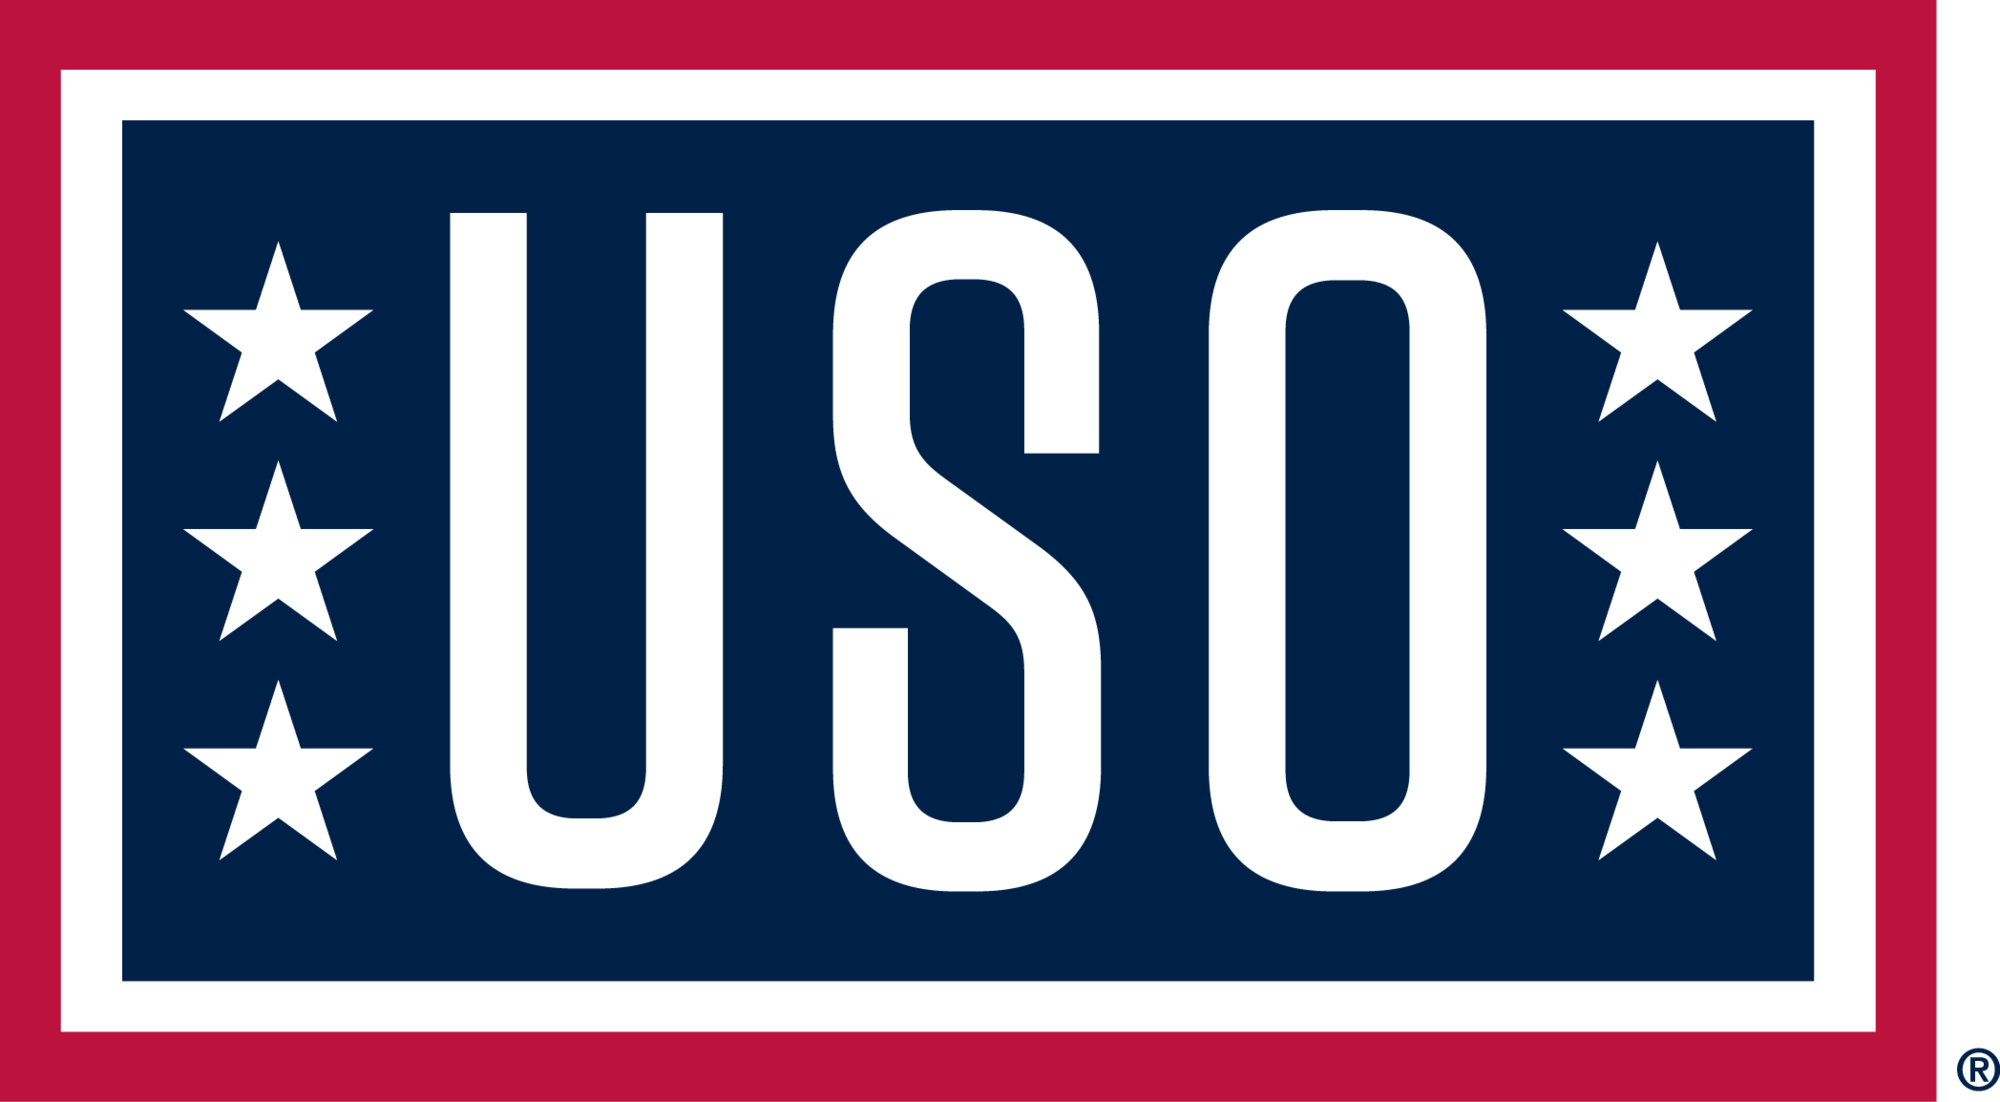 Located inside the AMC Passenger Terminal on Joint Base McGuire-Dix-Lakehurst, New Jersey, is the USO center. The USO offers many services and programs to its service members and families around the world. Whether if it’s entertainment, familial, or educational services, the USO provides.